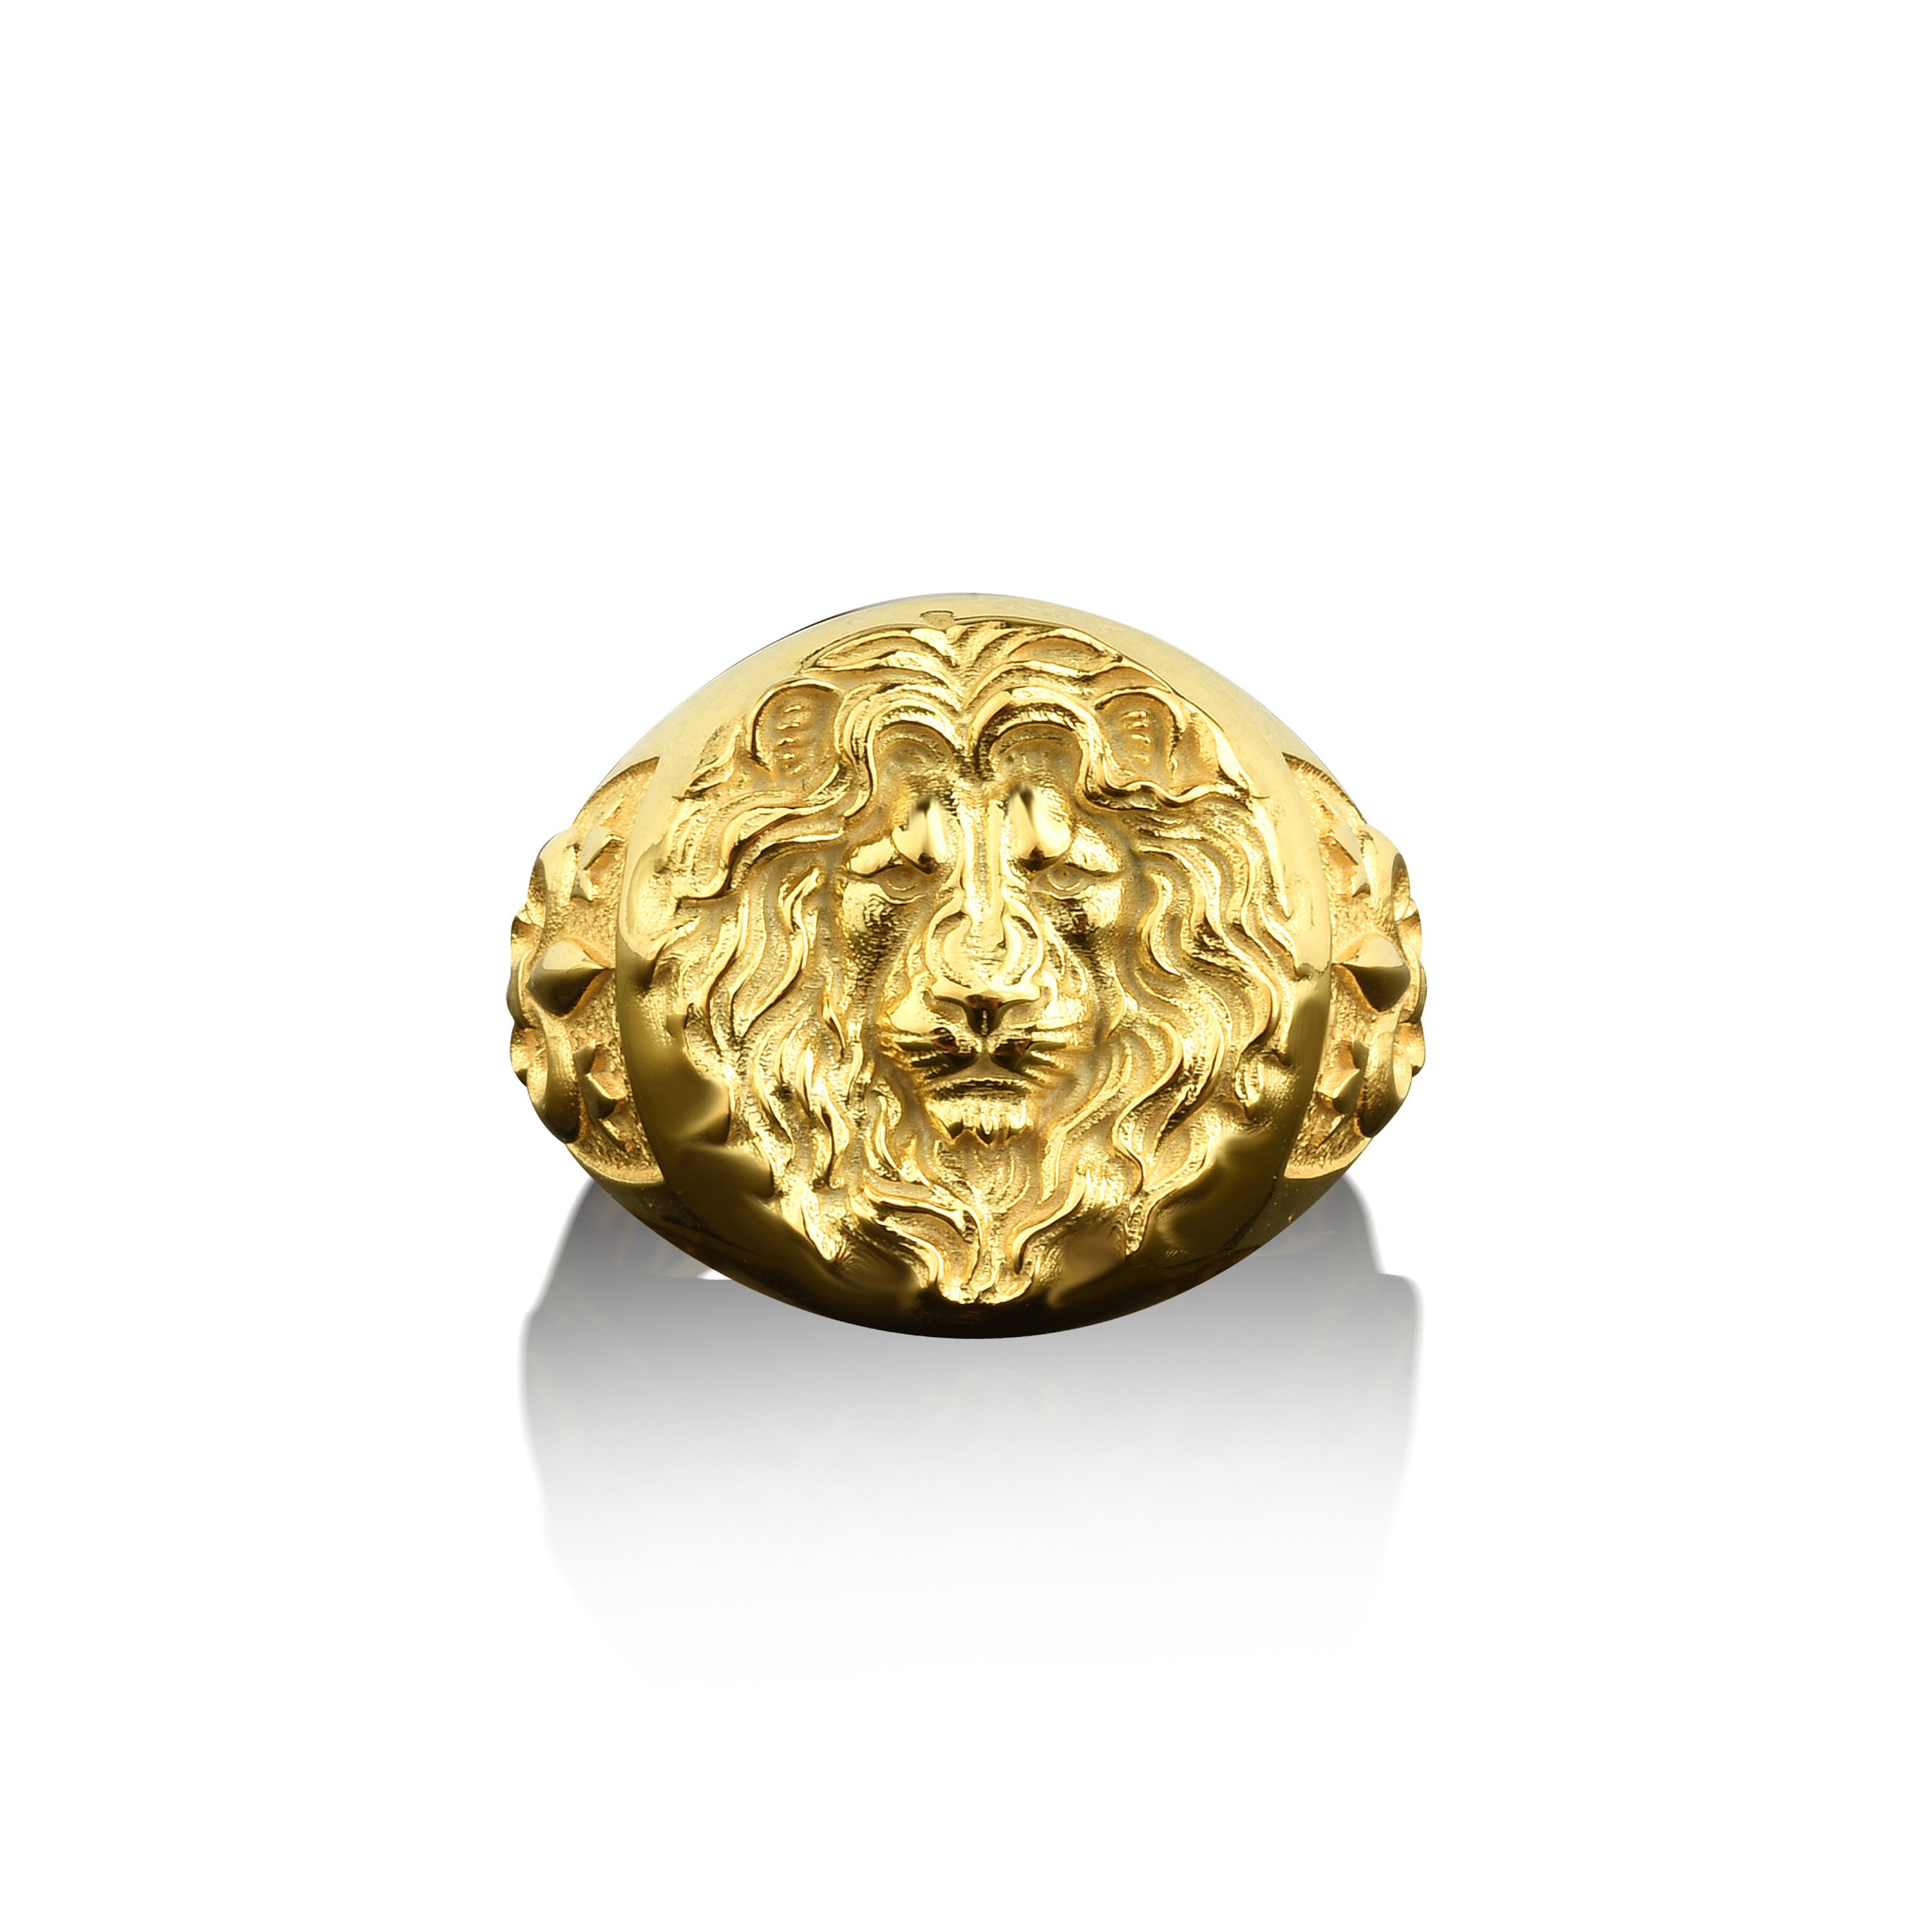 Solid 24K Yellow Gold Handcarved Large Heavy Mens Lion Ring Size 5 - 11 ,  Mens Lion Head Gold Ring